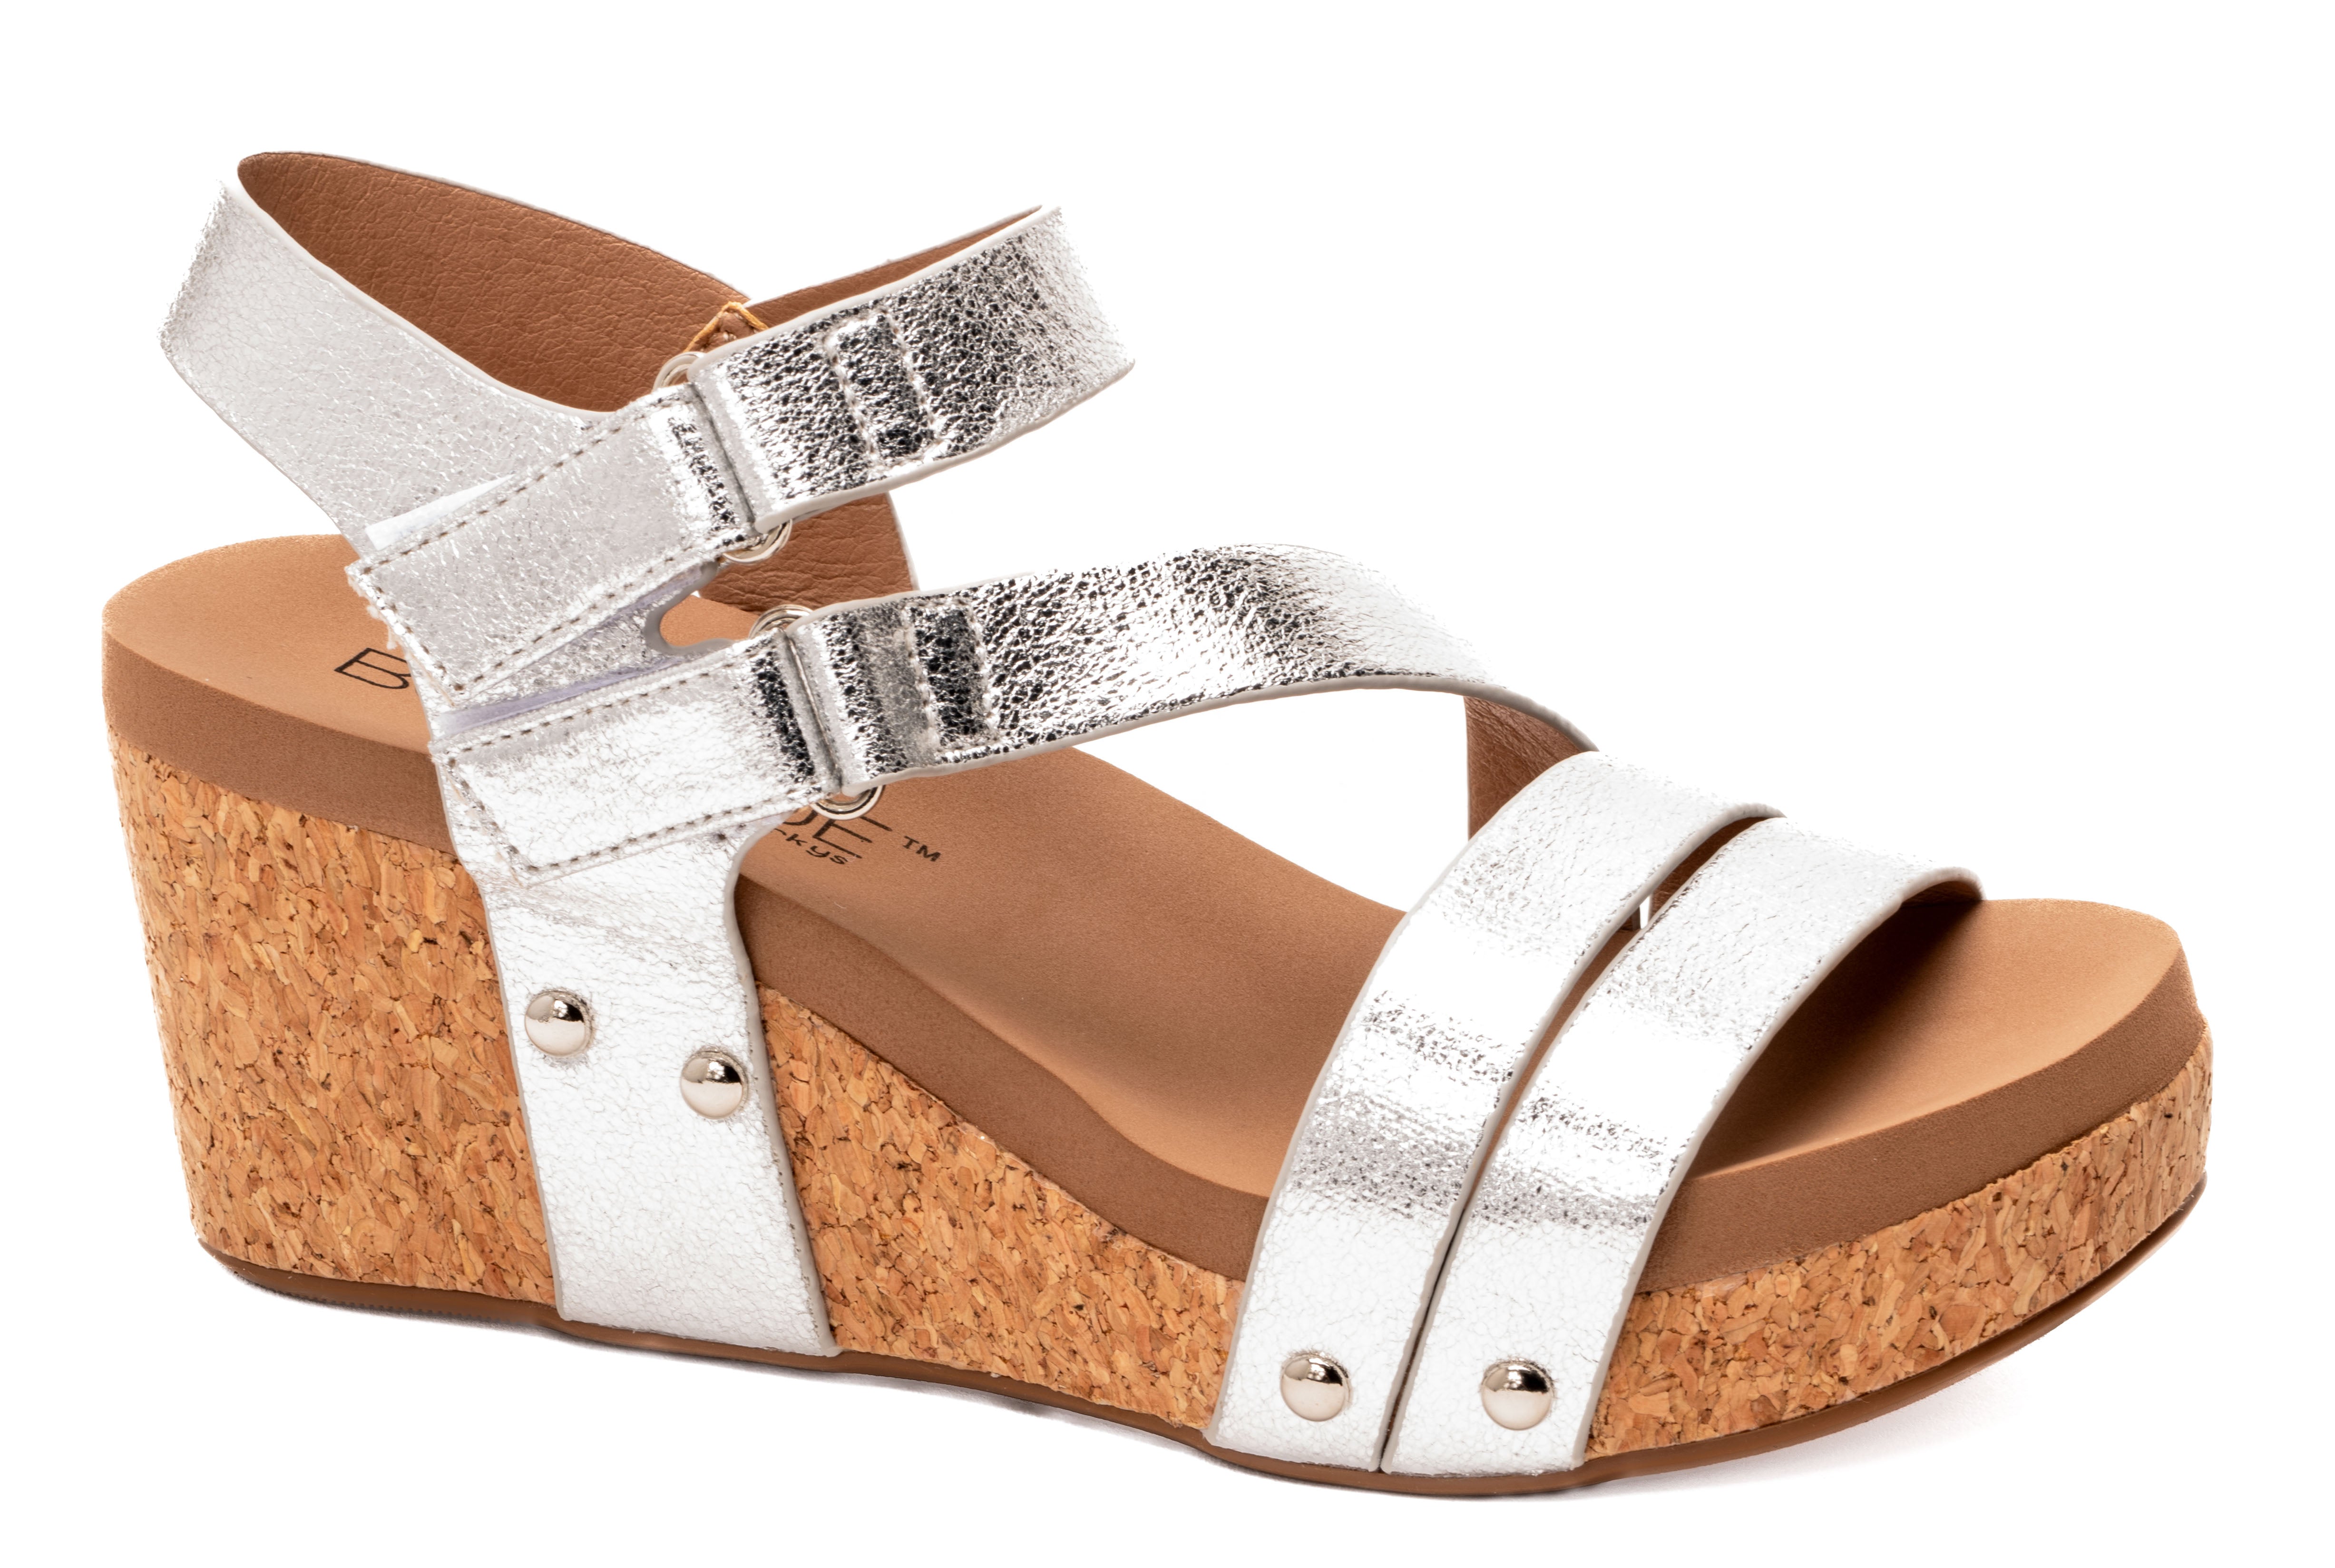 Giggle Wedge by Corky’s